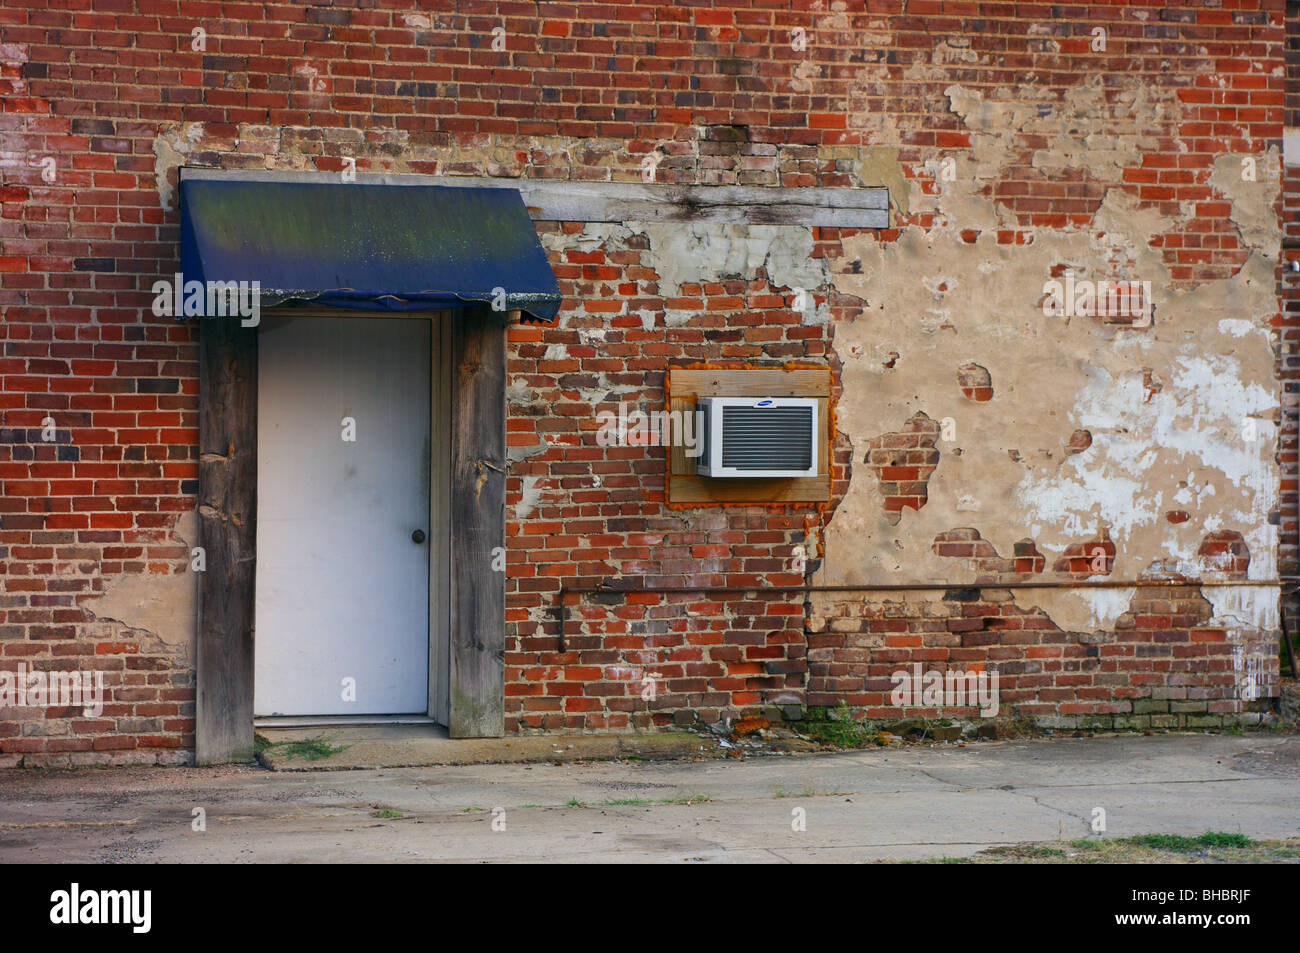 Old brick wall with door, awning and window air conditioner Stock Photo